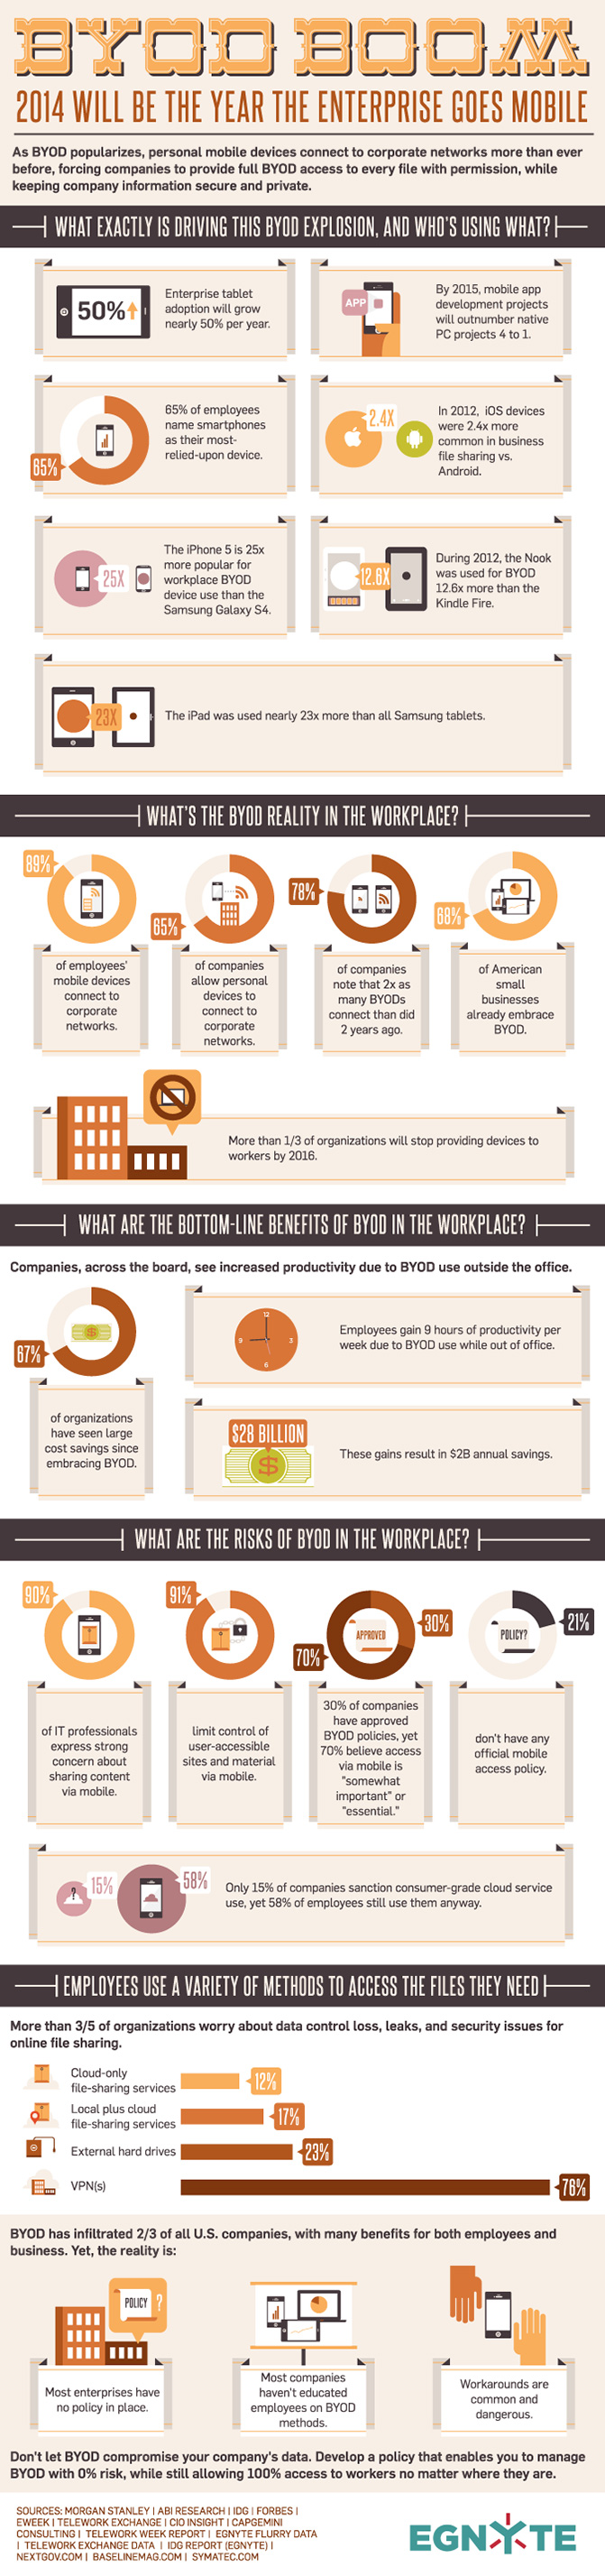 byod infographic